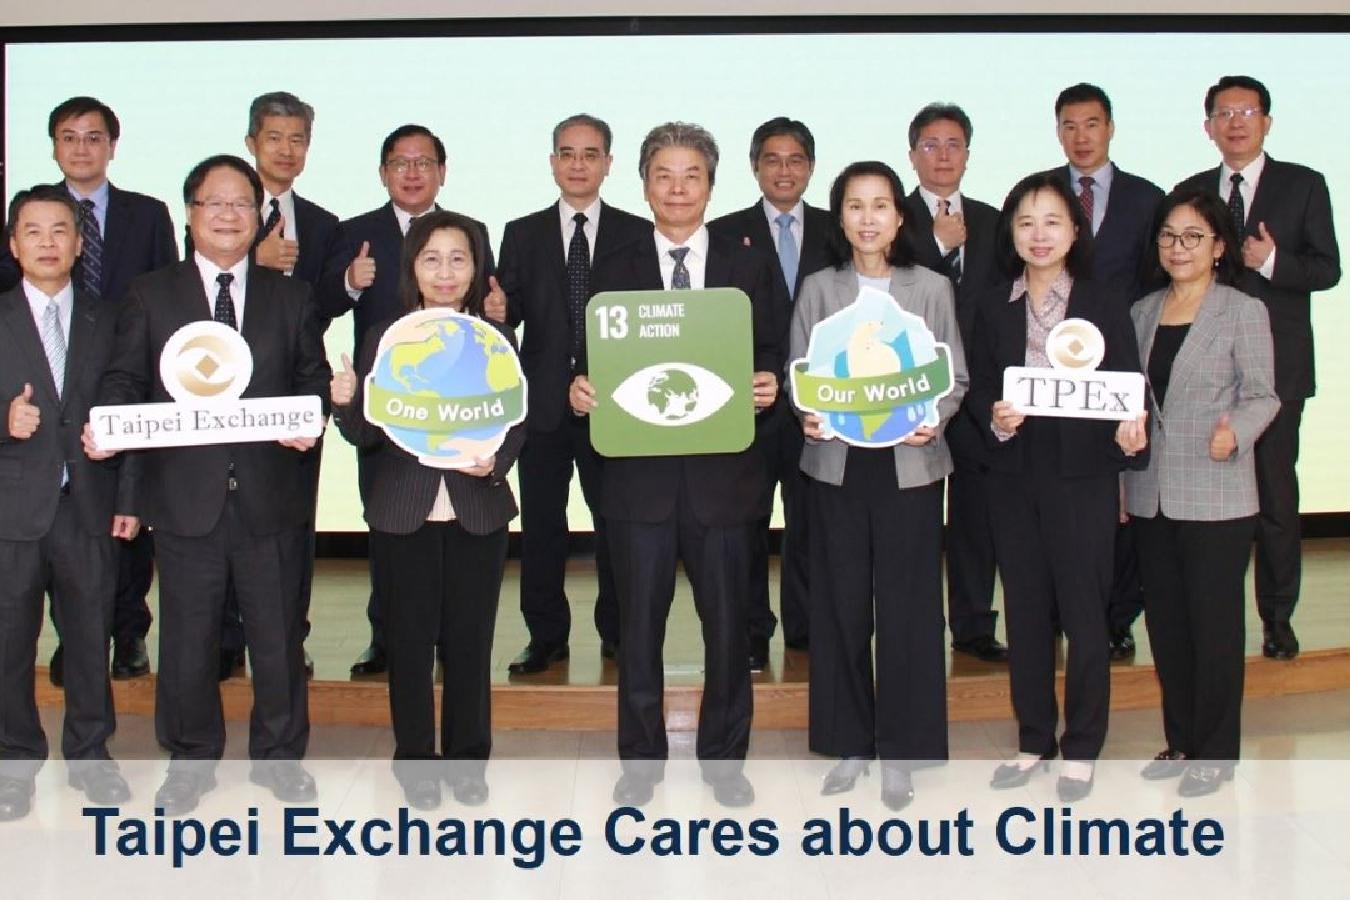 Taipei Exchange Cares about Climate  Taipei Exchange (TPEx) is proud to join the global event,"Ring the Bell for Climate 2023".  Hosted  by  Chairman  Philip  Chen  and all members  of Sustainable  Development Committee attended, TPEx  held  a ceremony to  show  its  attention  to the climate  change issue.  Additionally, Taipei  Exchange writes for World  Federation  of  Exchanges(WFE) Focus November, speaking out to the world about TPEx's efforts on sustainable development.